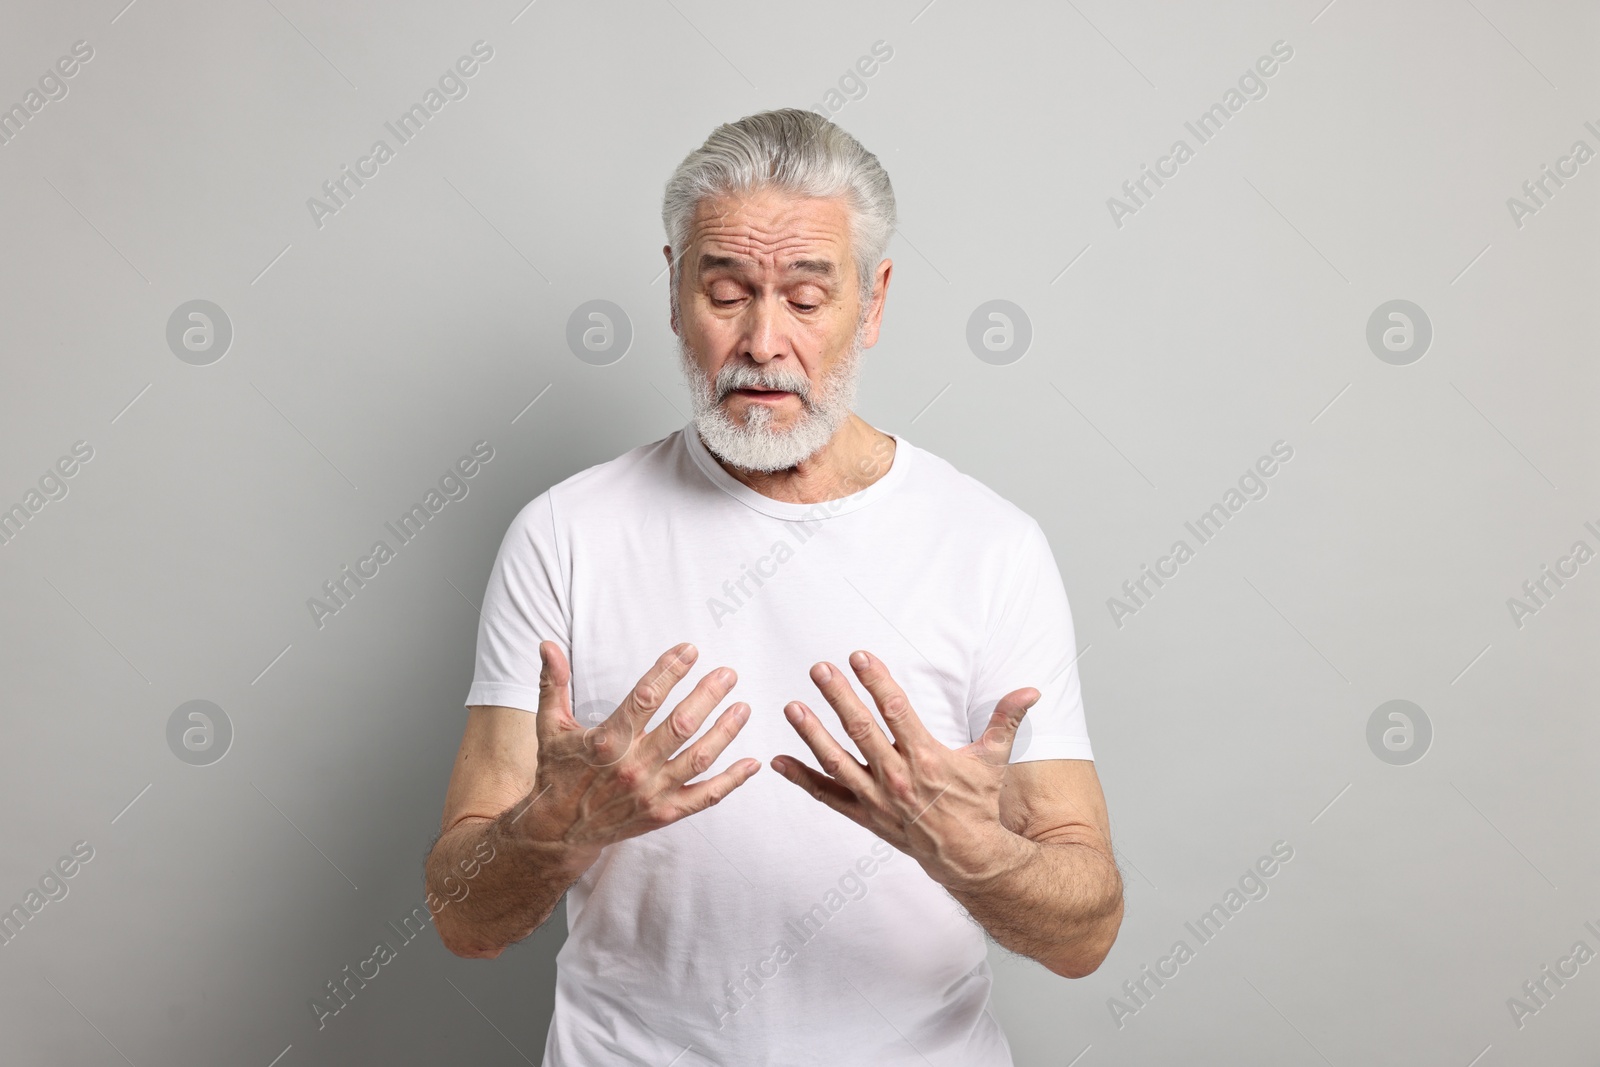 Photo of Arthritis symptoms. Man suffering from pain in hands on gray background